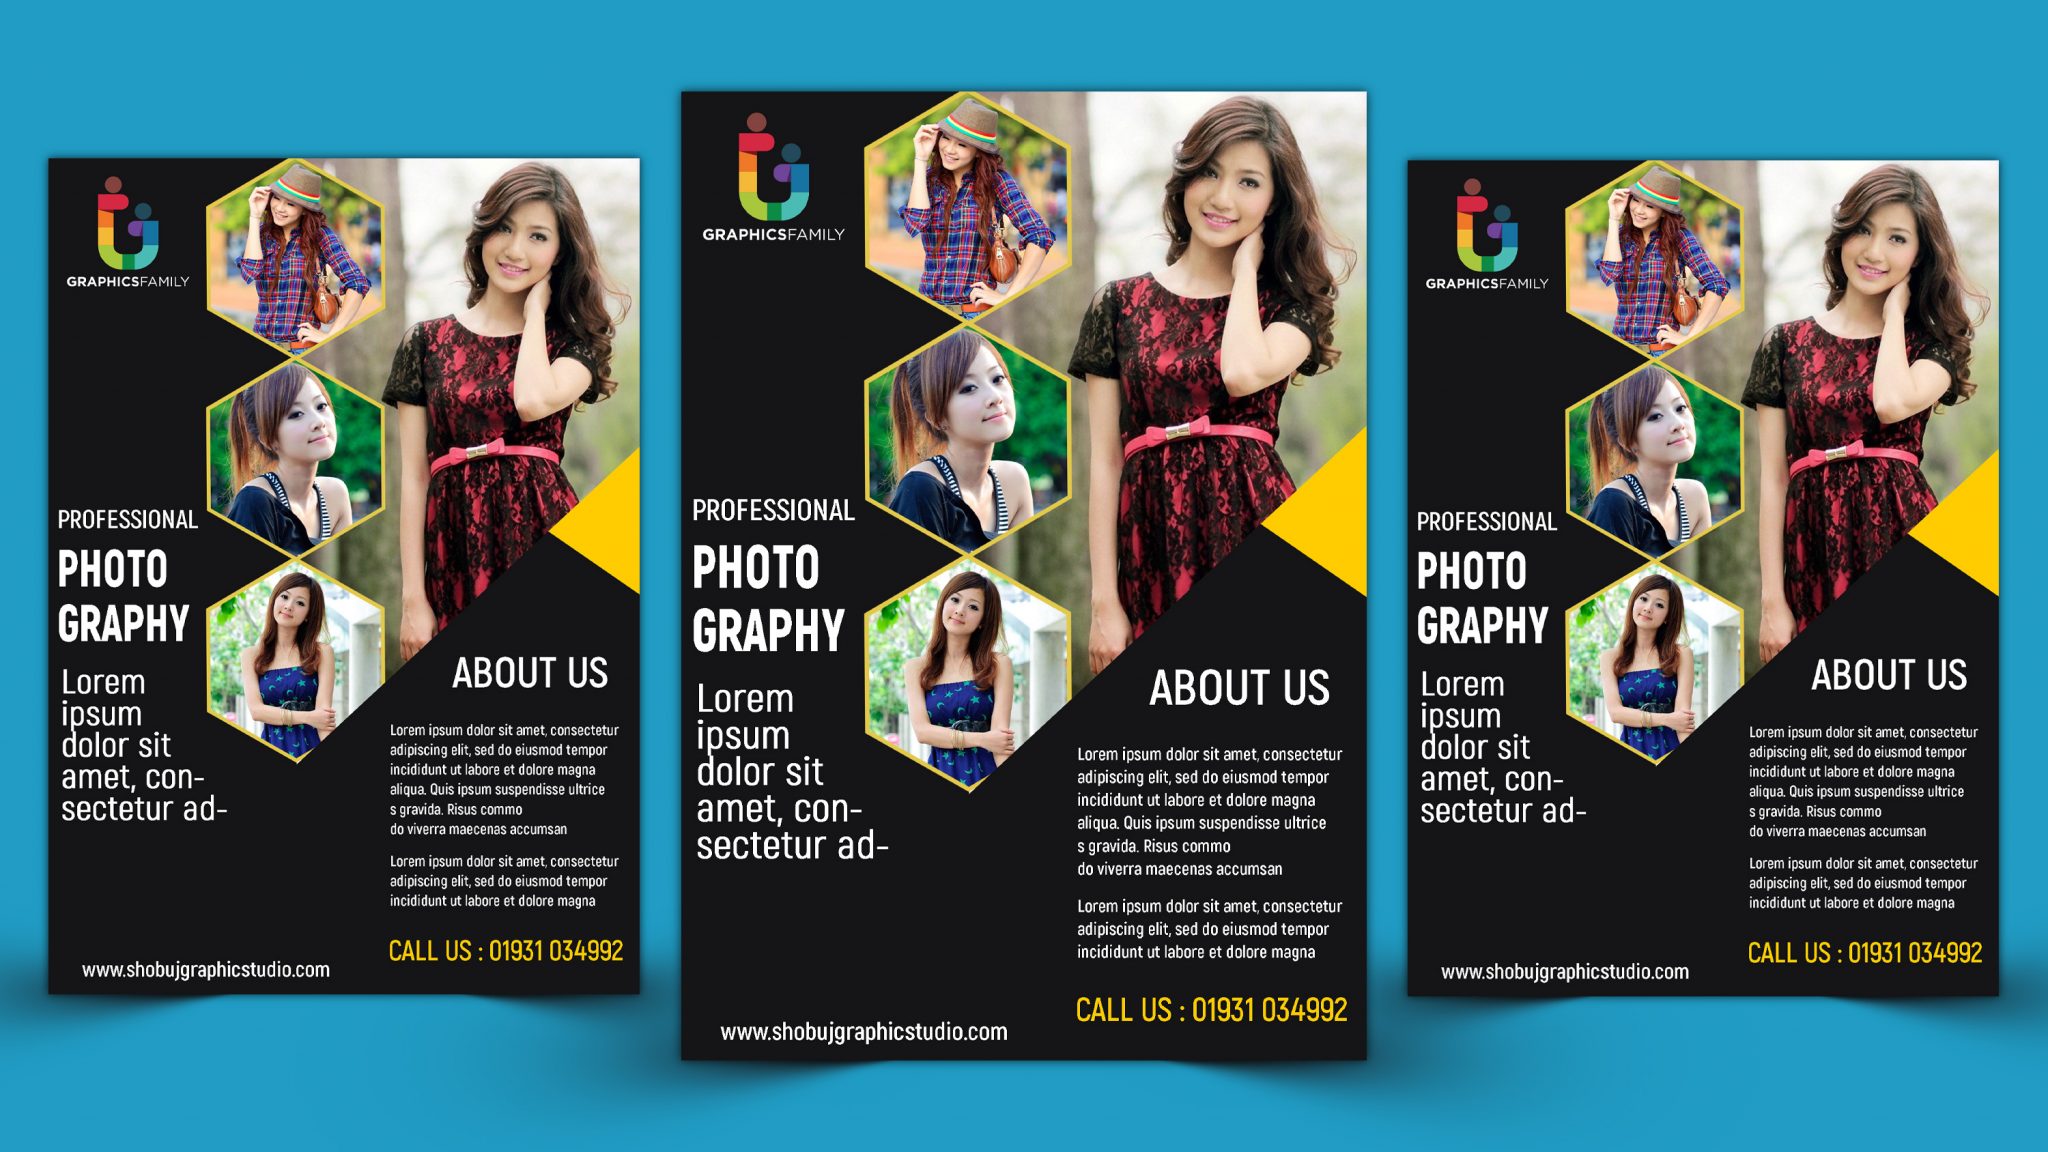 Free Professional Photography Studio Flyer Template